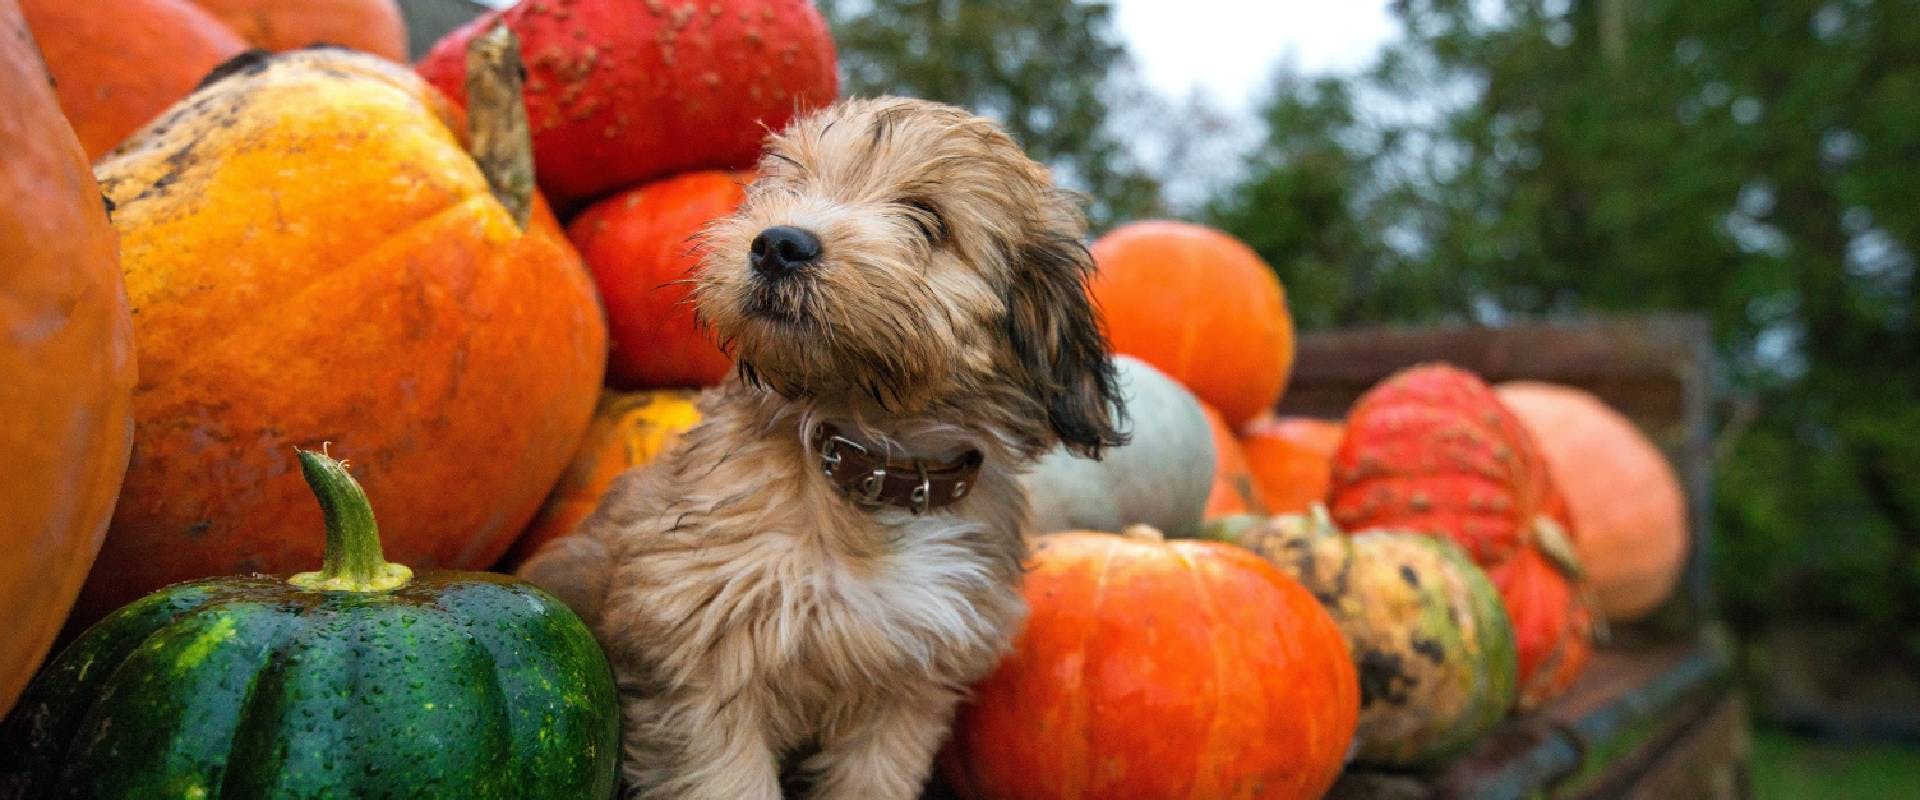 Cute, wet puppy is sitting in trailer and guarding pumpkins 